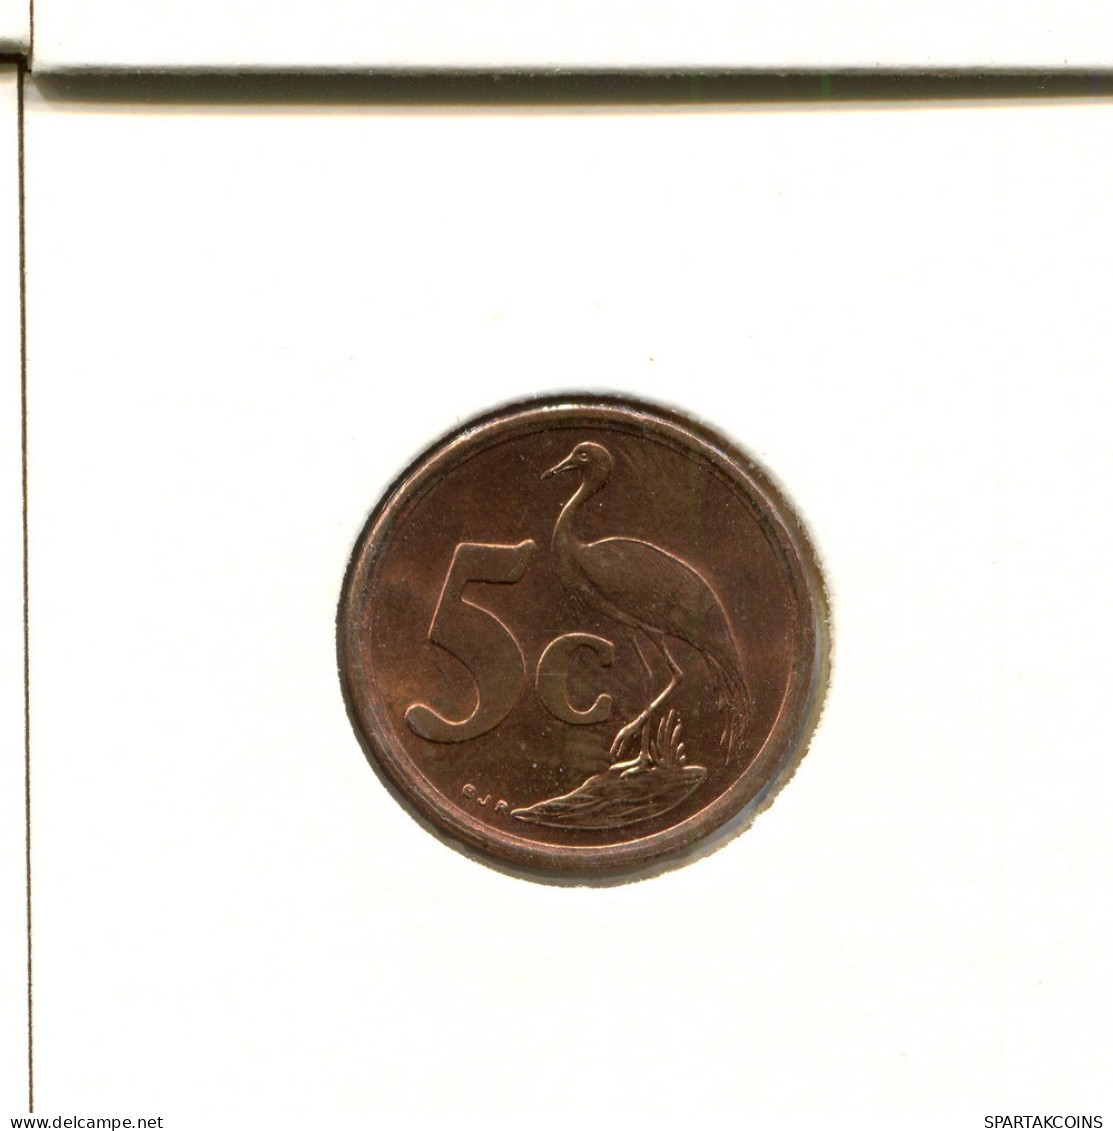 5 CENTS 1997 SÜDAFRIKA SOUTH AFRICA Münze #AT135.D.A - South Africa